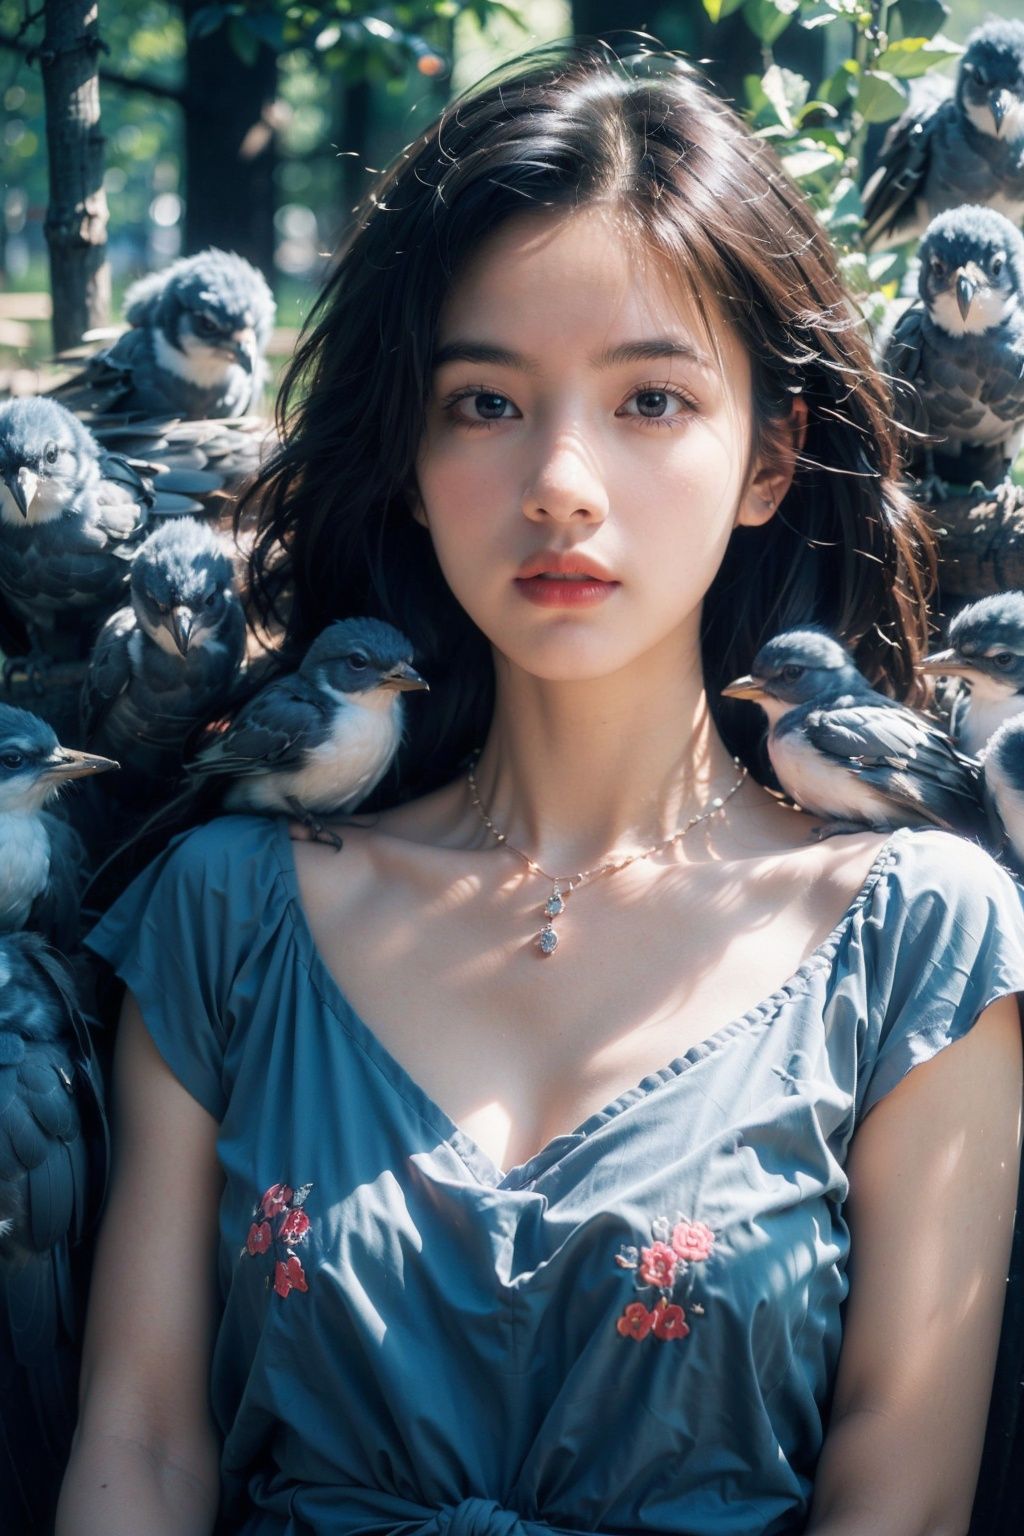 (Masterpiece, best quality, high-resolution: 1.2), (upper body), 1 girl, blue floral dress. Solo, (surrounded by 20 birds), powder blusher, smoky makeup, lipstick, diamond necklace, black hair, long black hair, flowers, trees, 20 identical birds sleep together, squeeze each other, squint. Foreground occlusion, portrait, depth of field, looking at the audience, slow motion, rose, retro, anatomical correctness, best quality, movie lighting